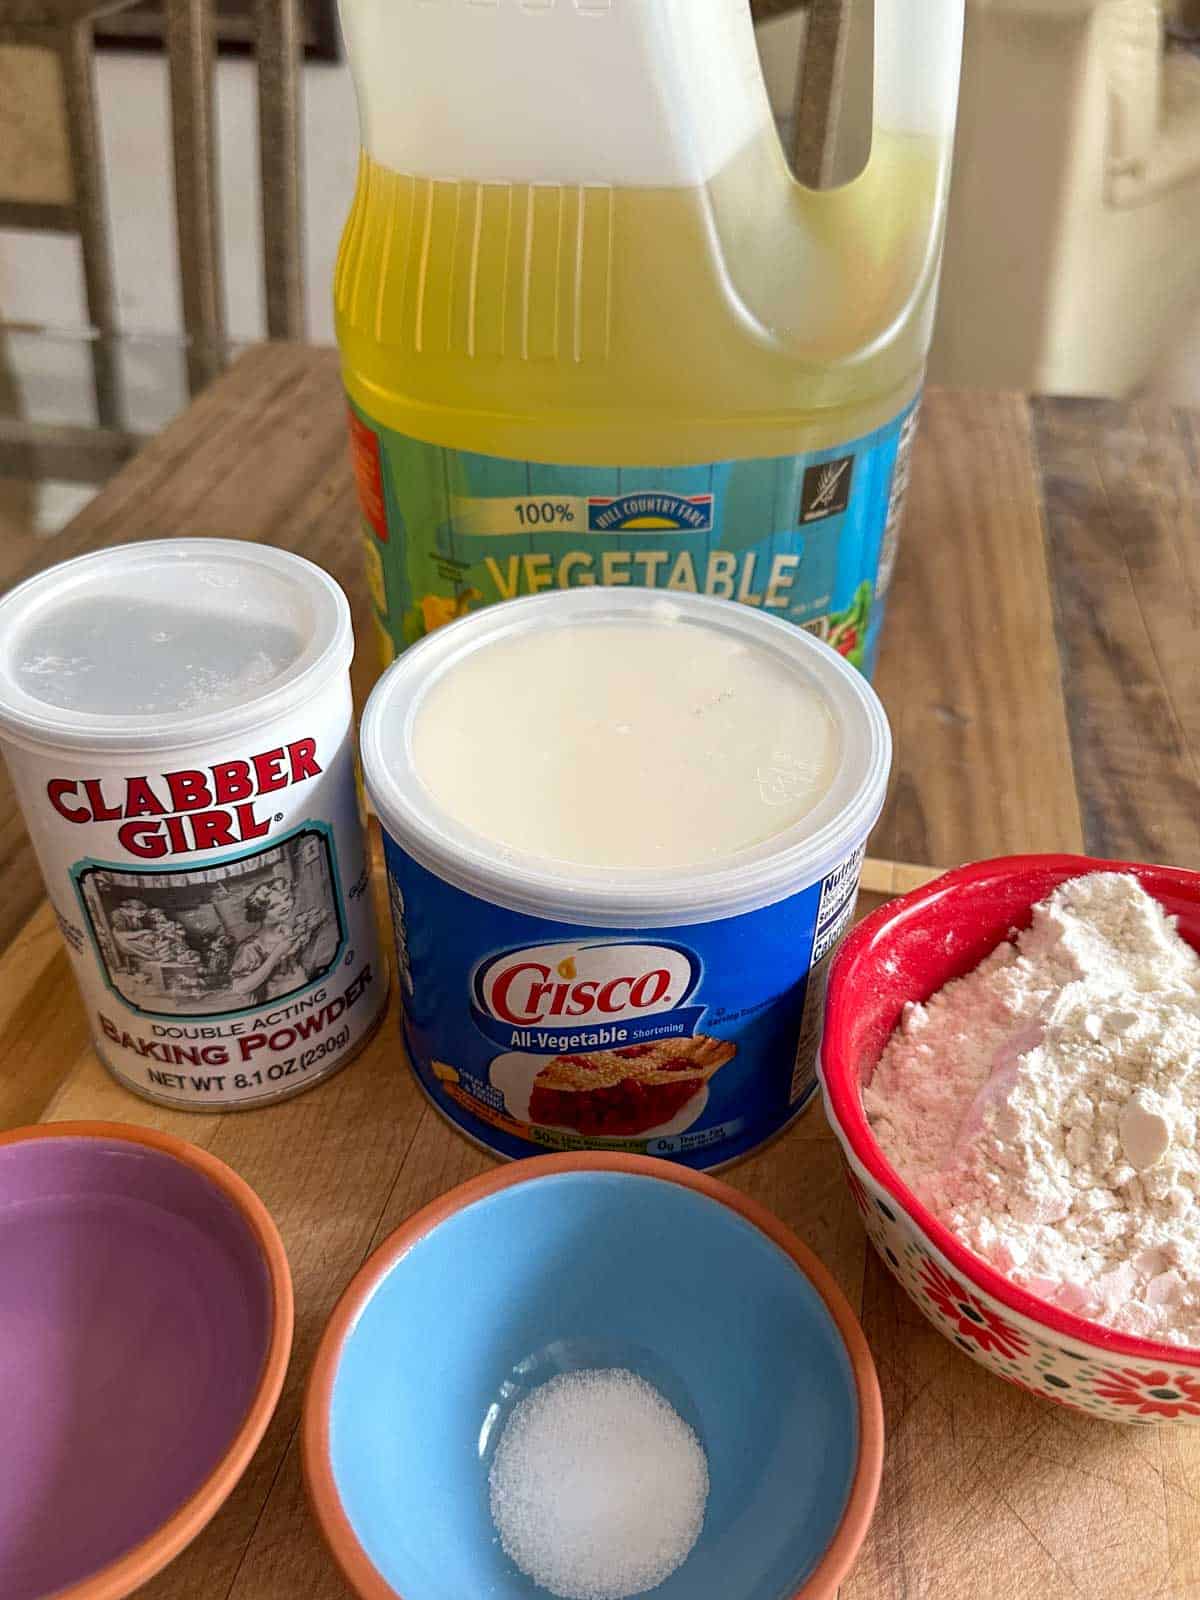 Vegetable oil container, baking powder container, Crisco vegetable shortening container, small red bowl with flour, and small bowls with water and salt.